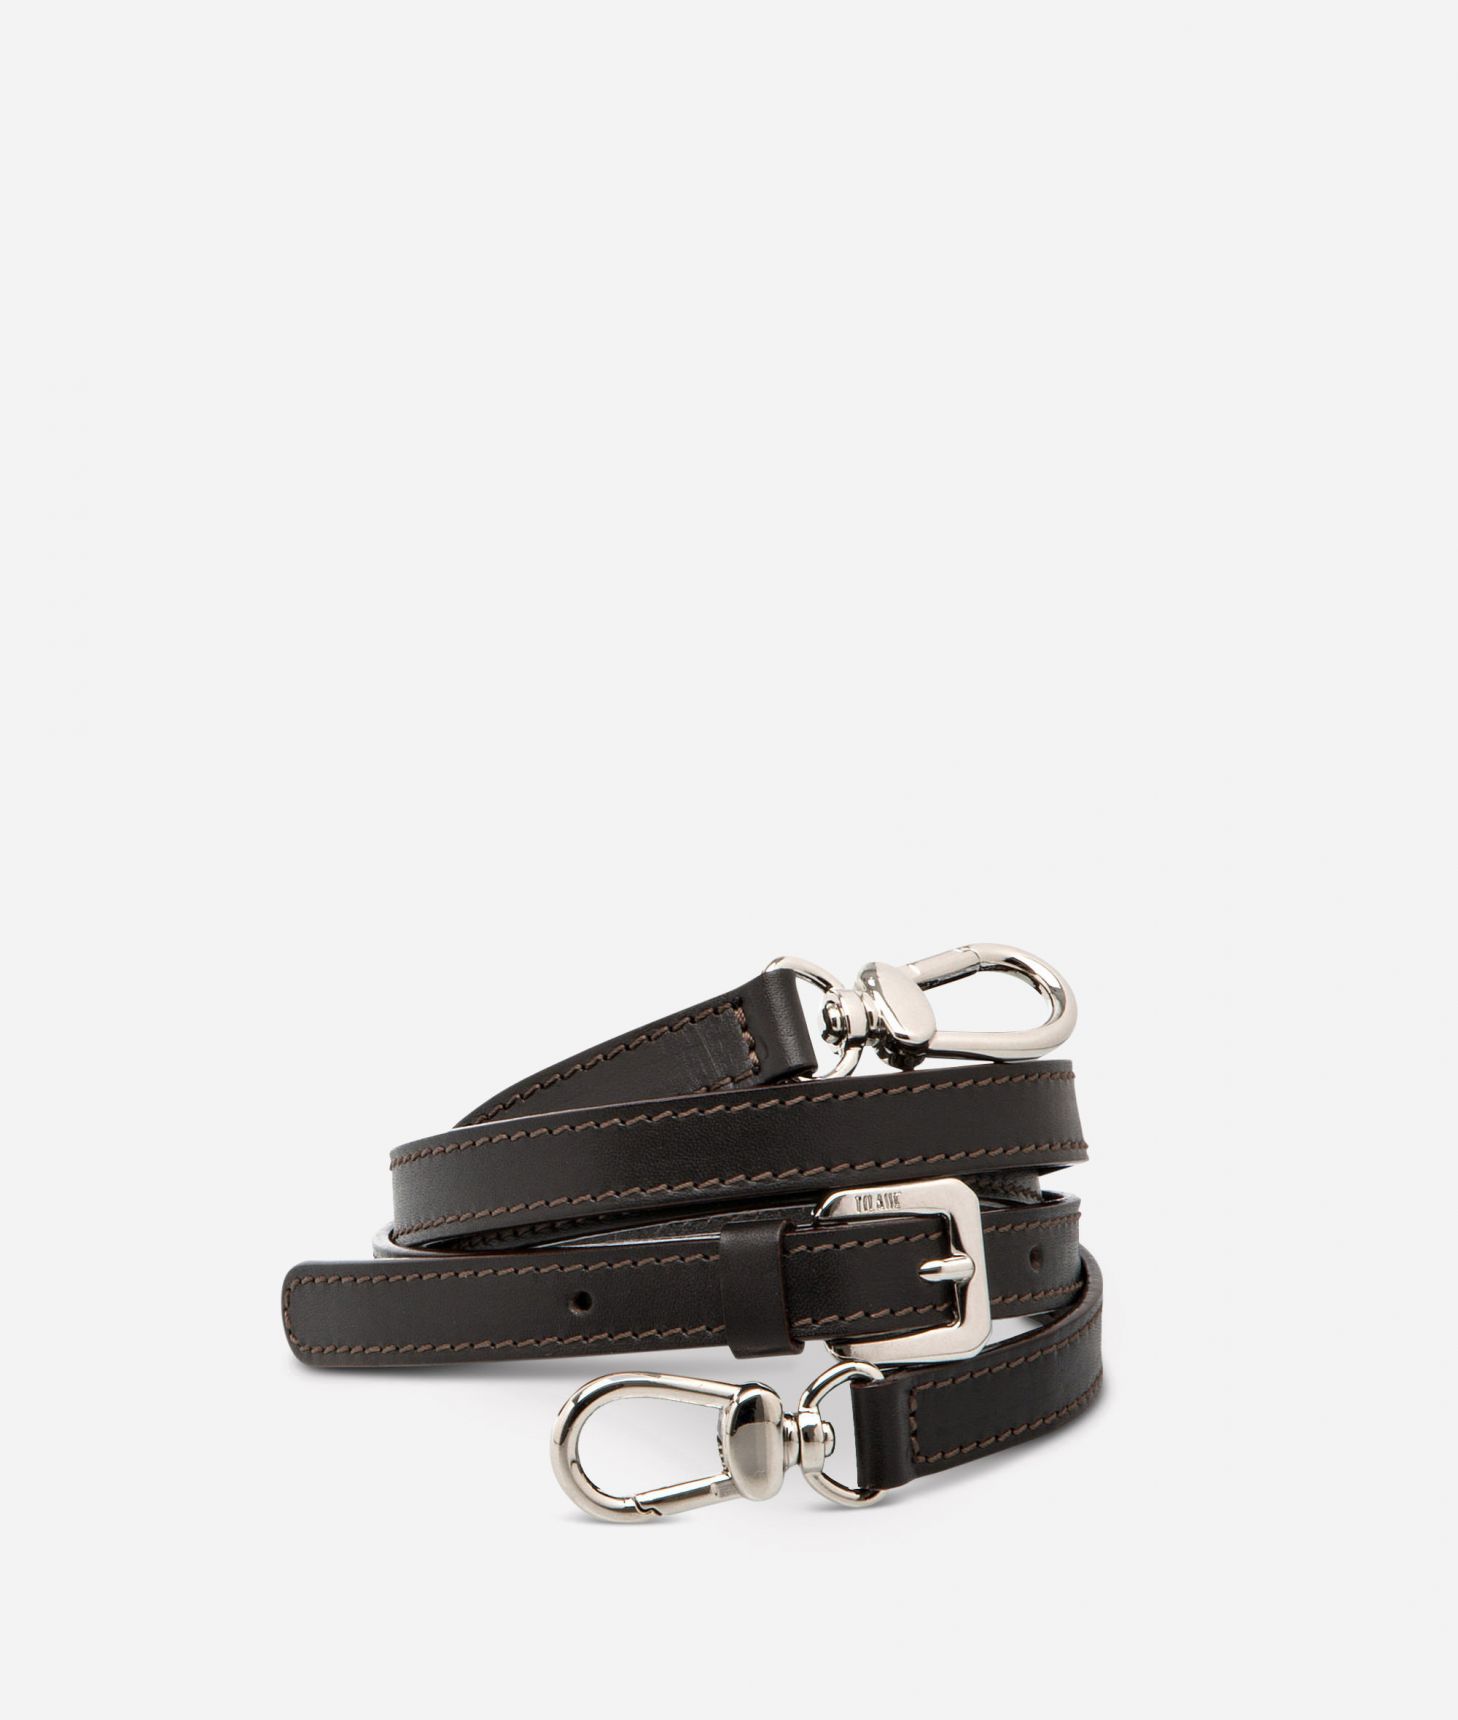 Adjustable strap in brown leather,front